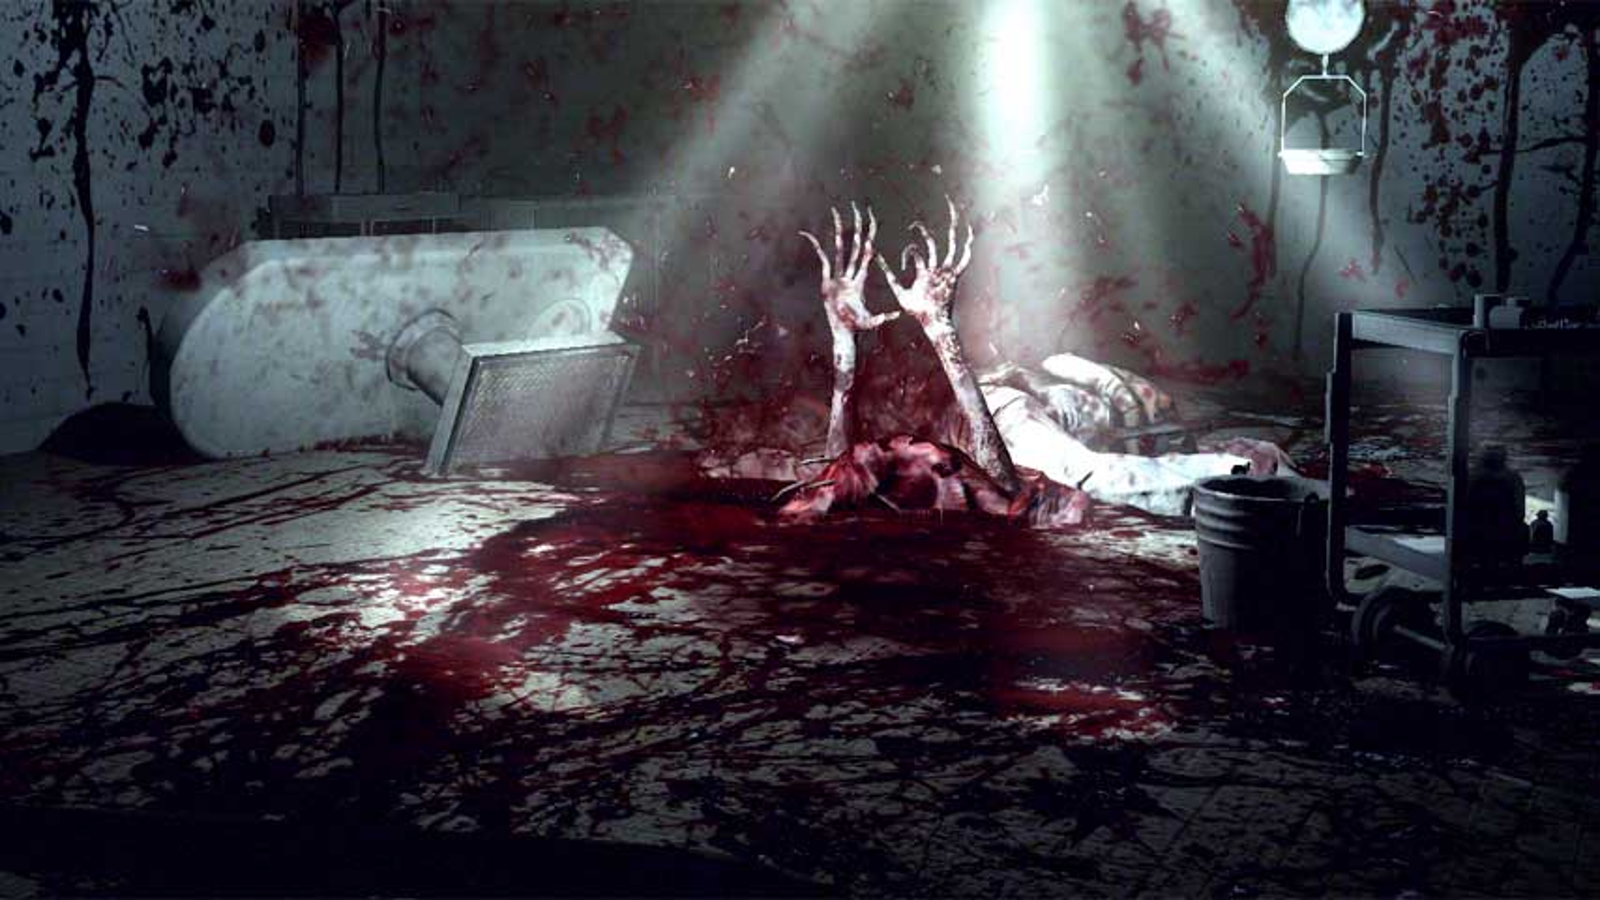 Evil Within Ps Vr